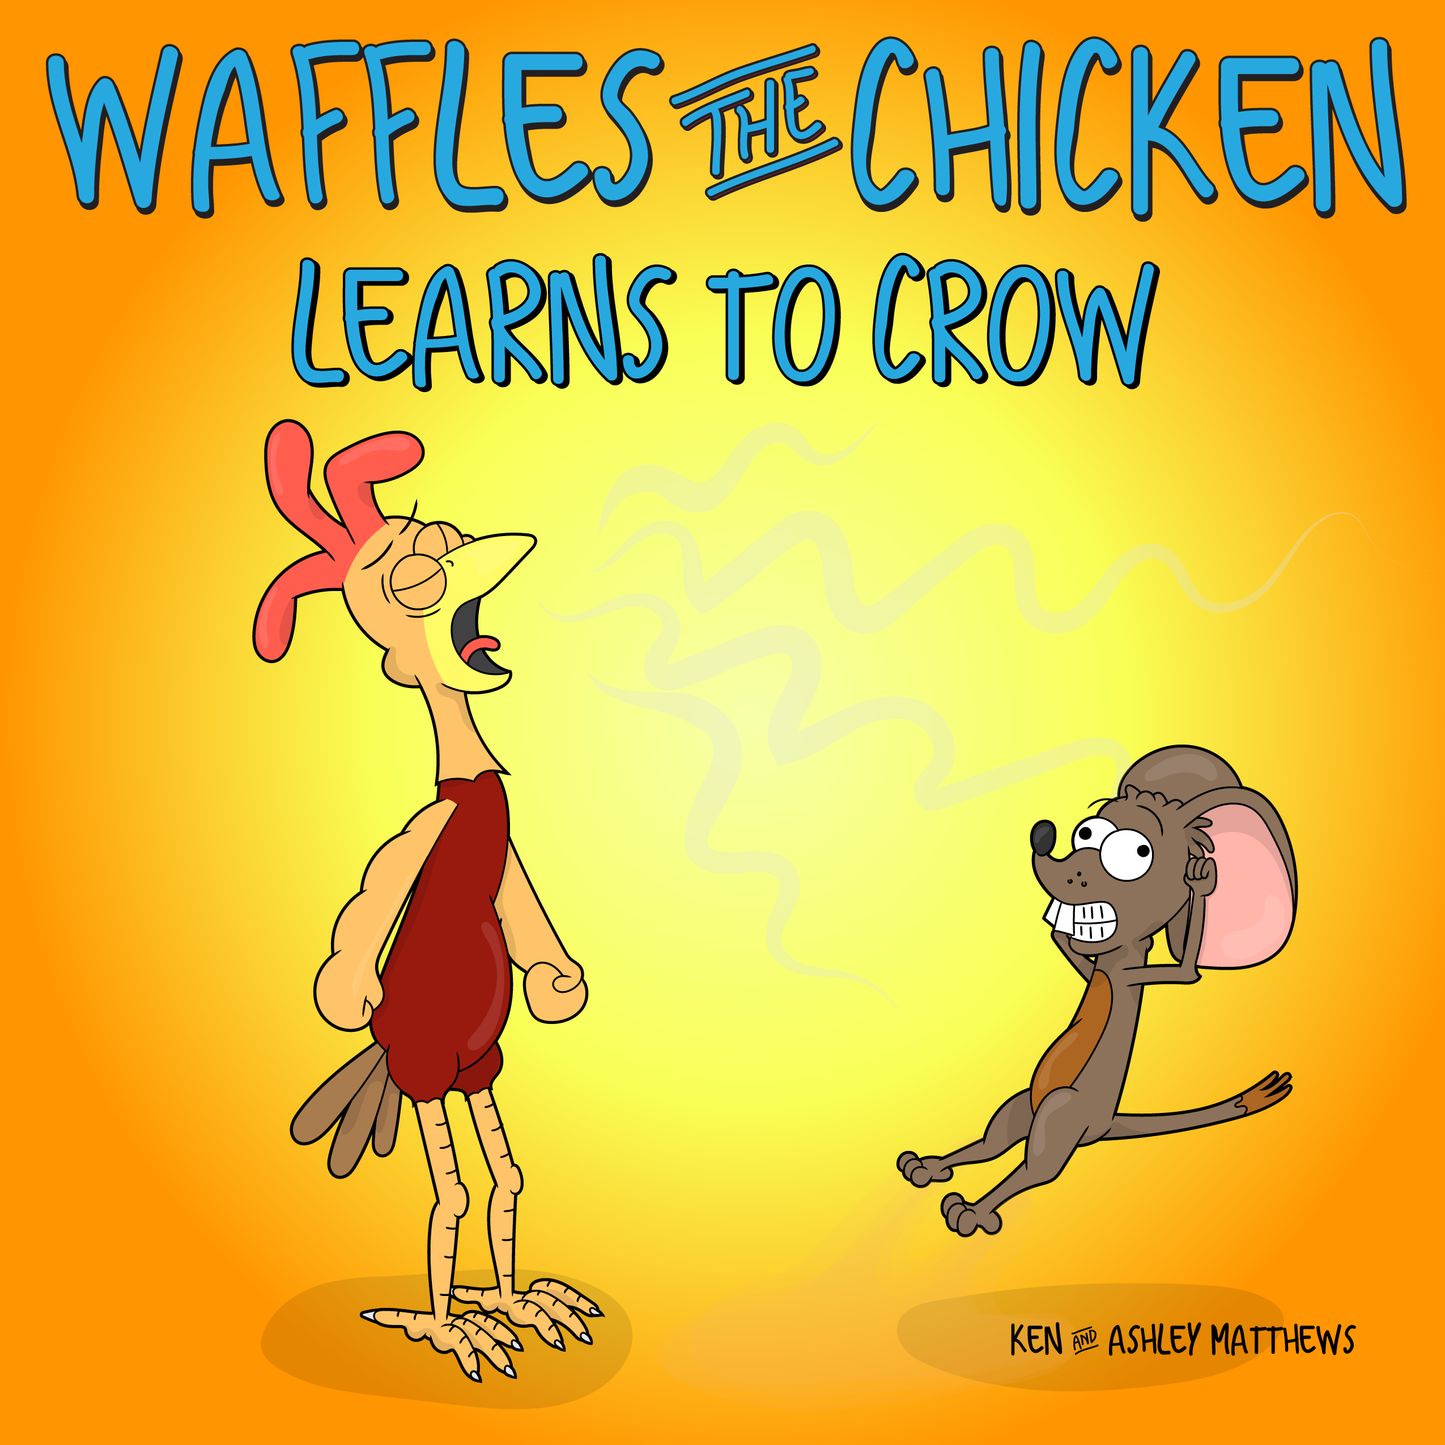 Waffles the Chicken Learns to Crow